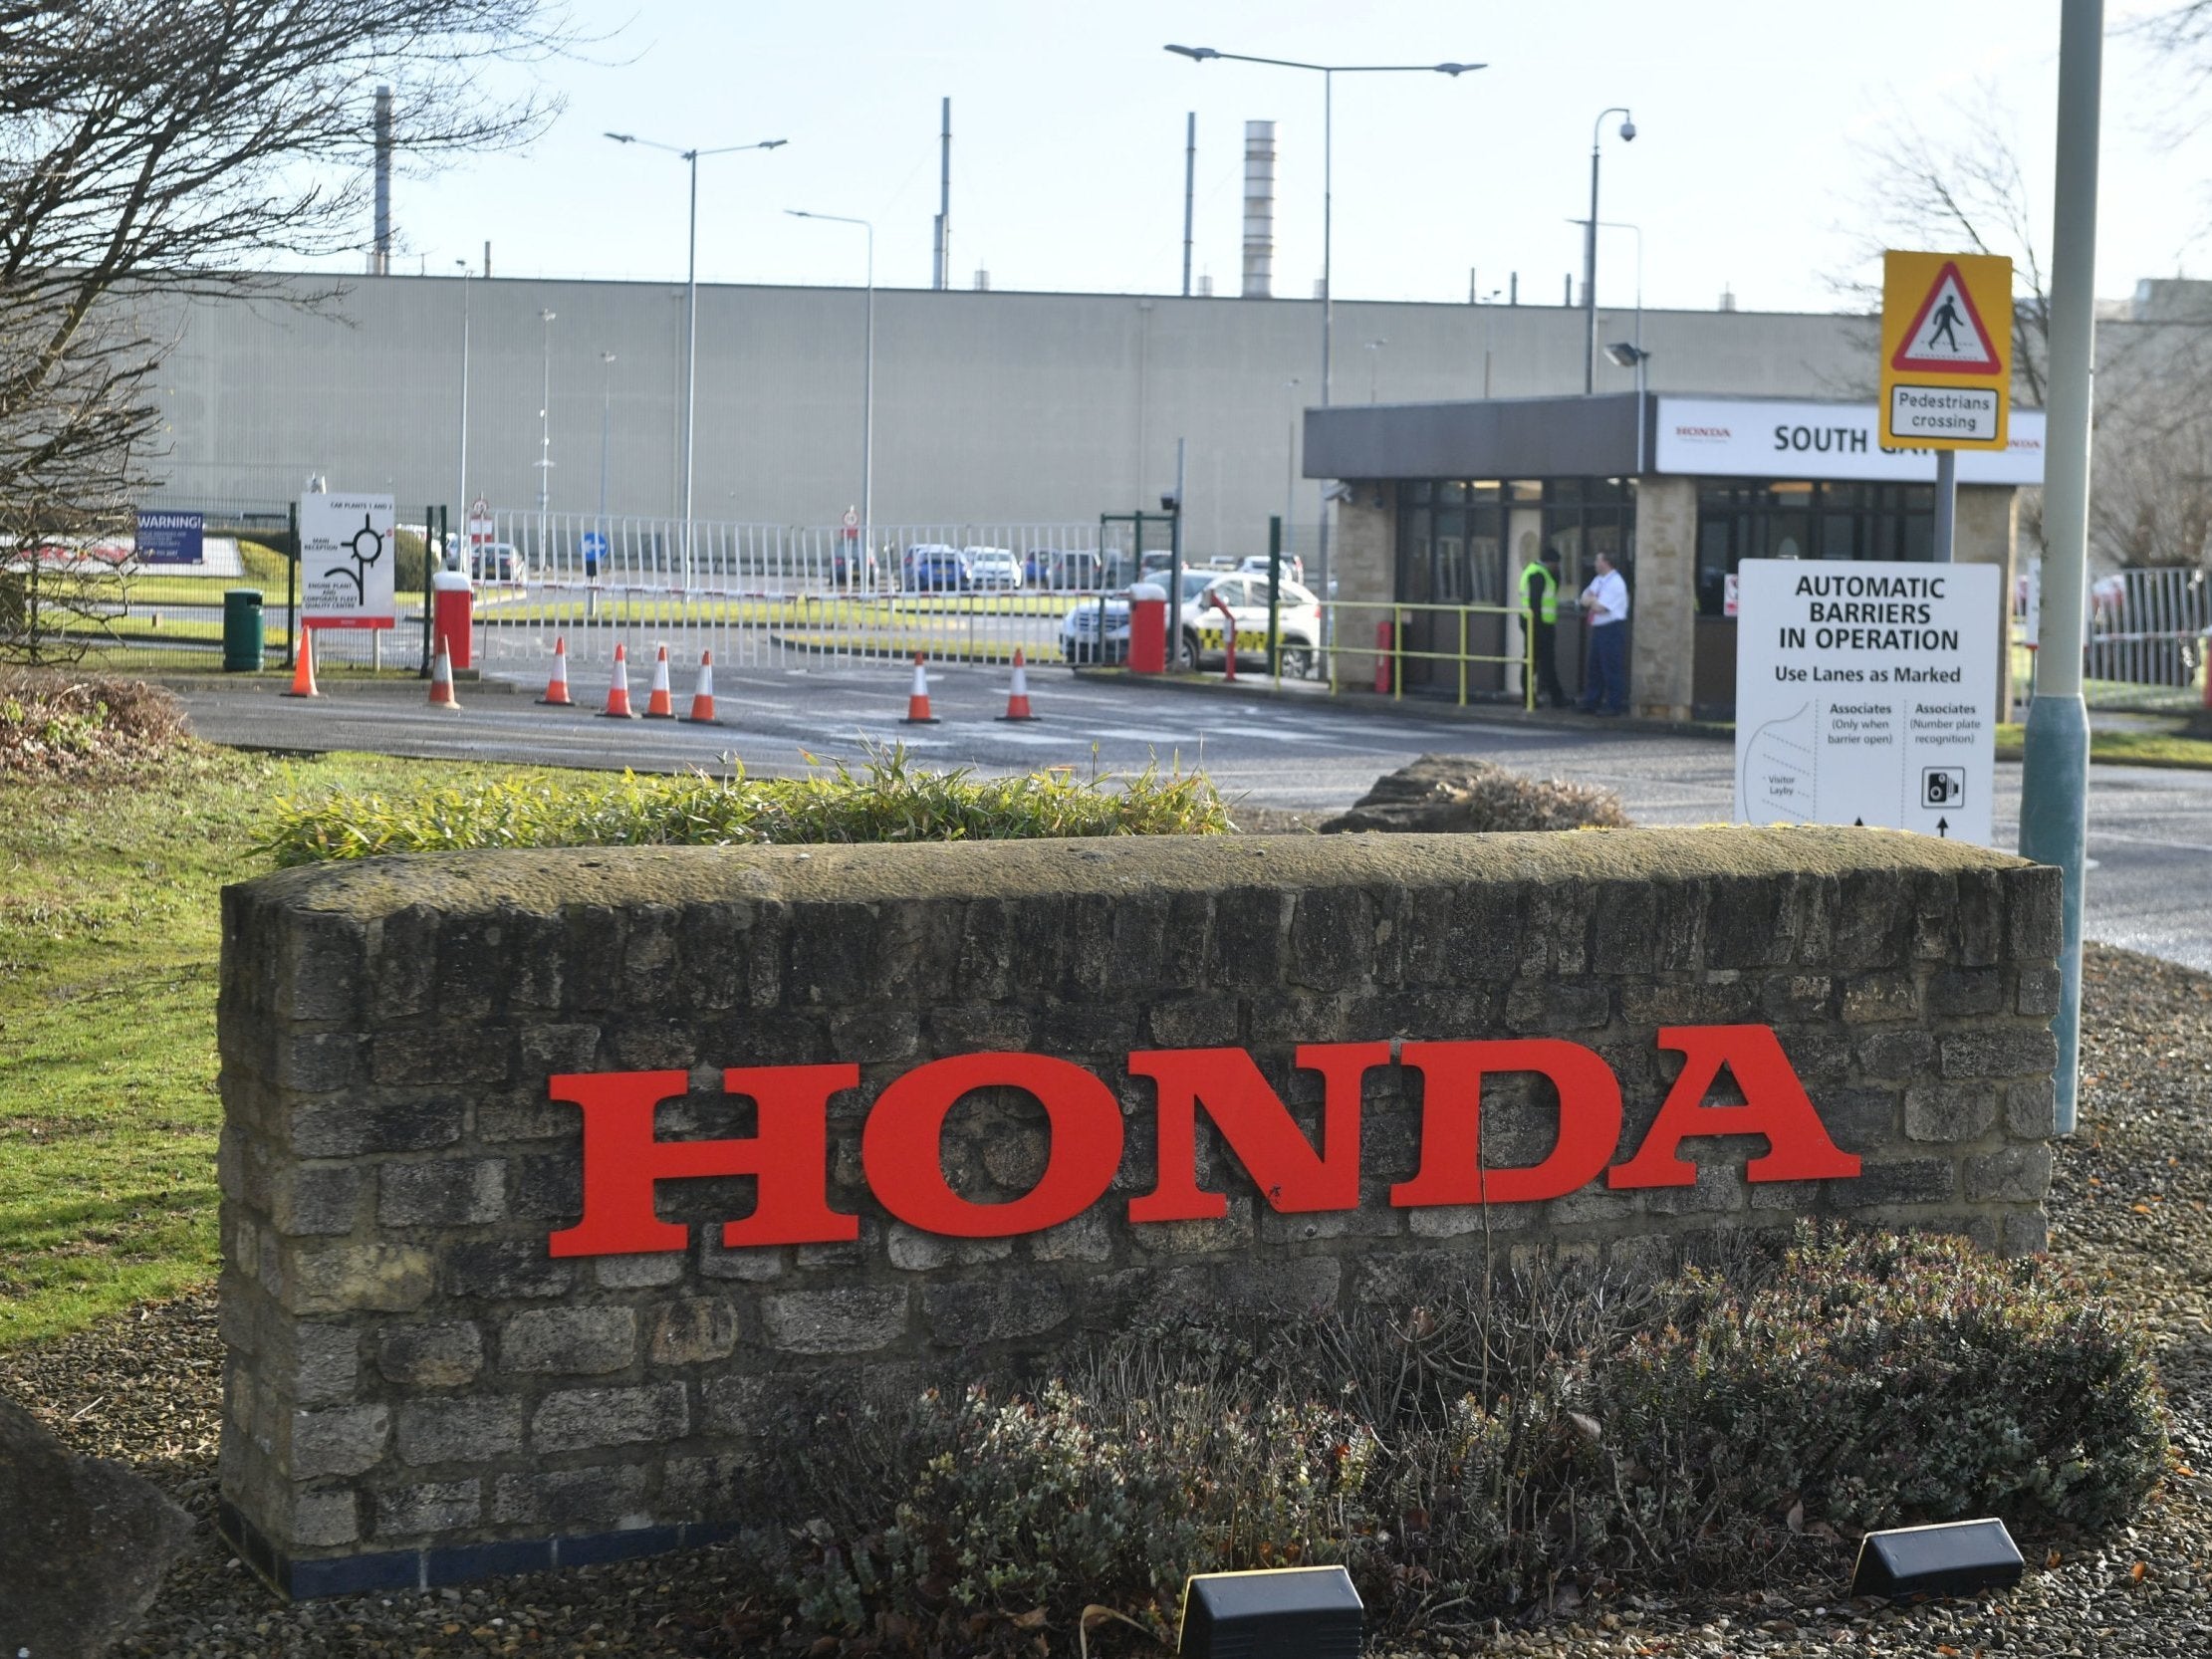 Thousands work at the Honda plant in Swindon